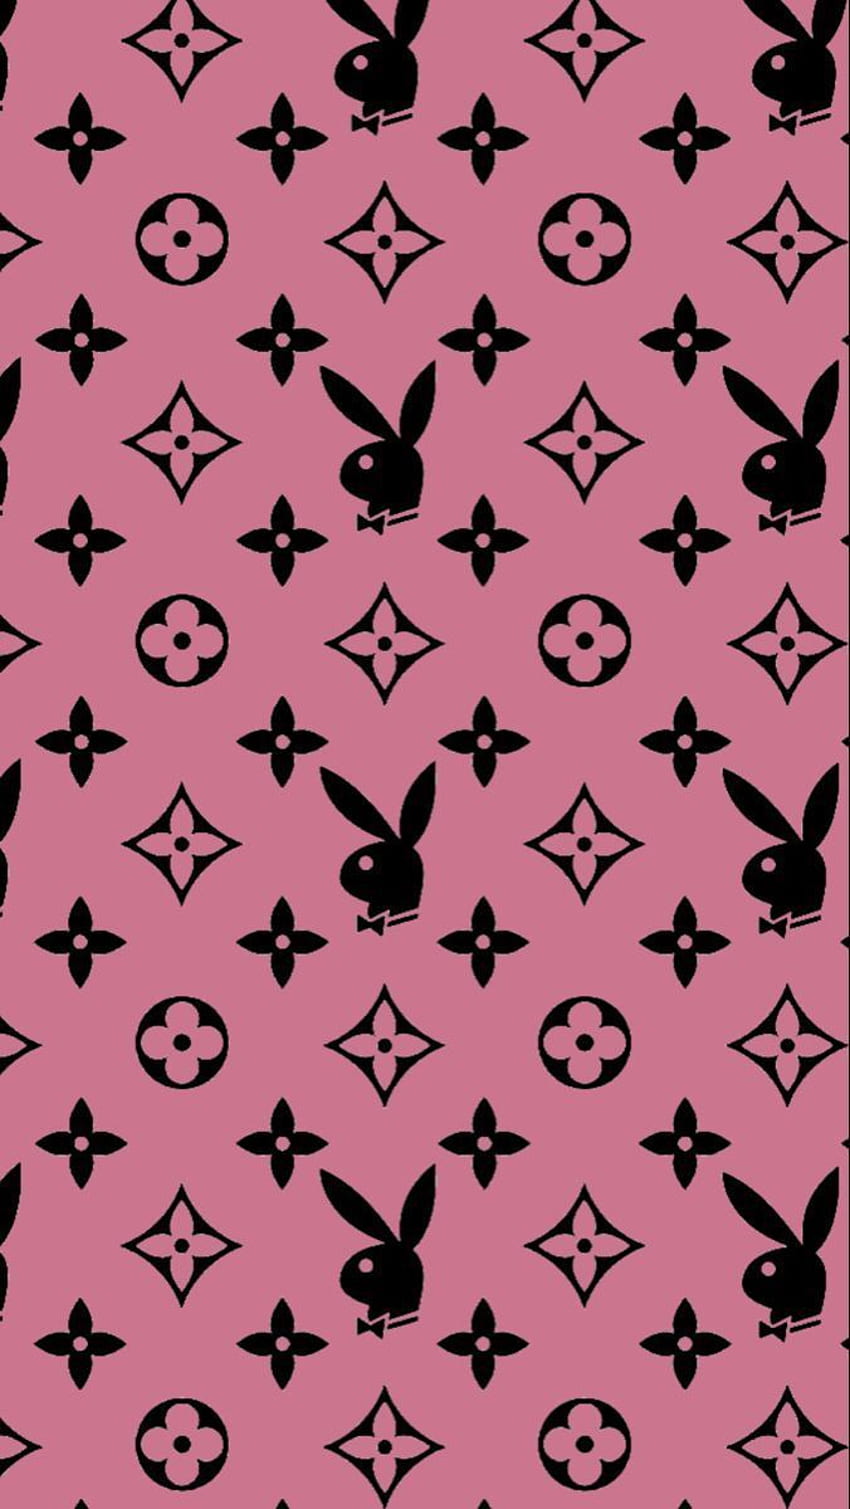 FREE Pink & Girly Luxury iphone wallpapers  Louis vuitton iphone wallpaper,  Pink wallpaper girly, Iphone wallpaper girly